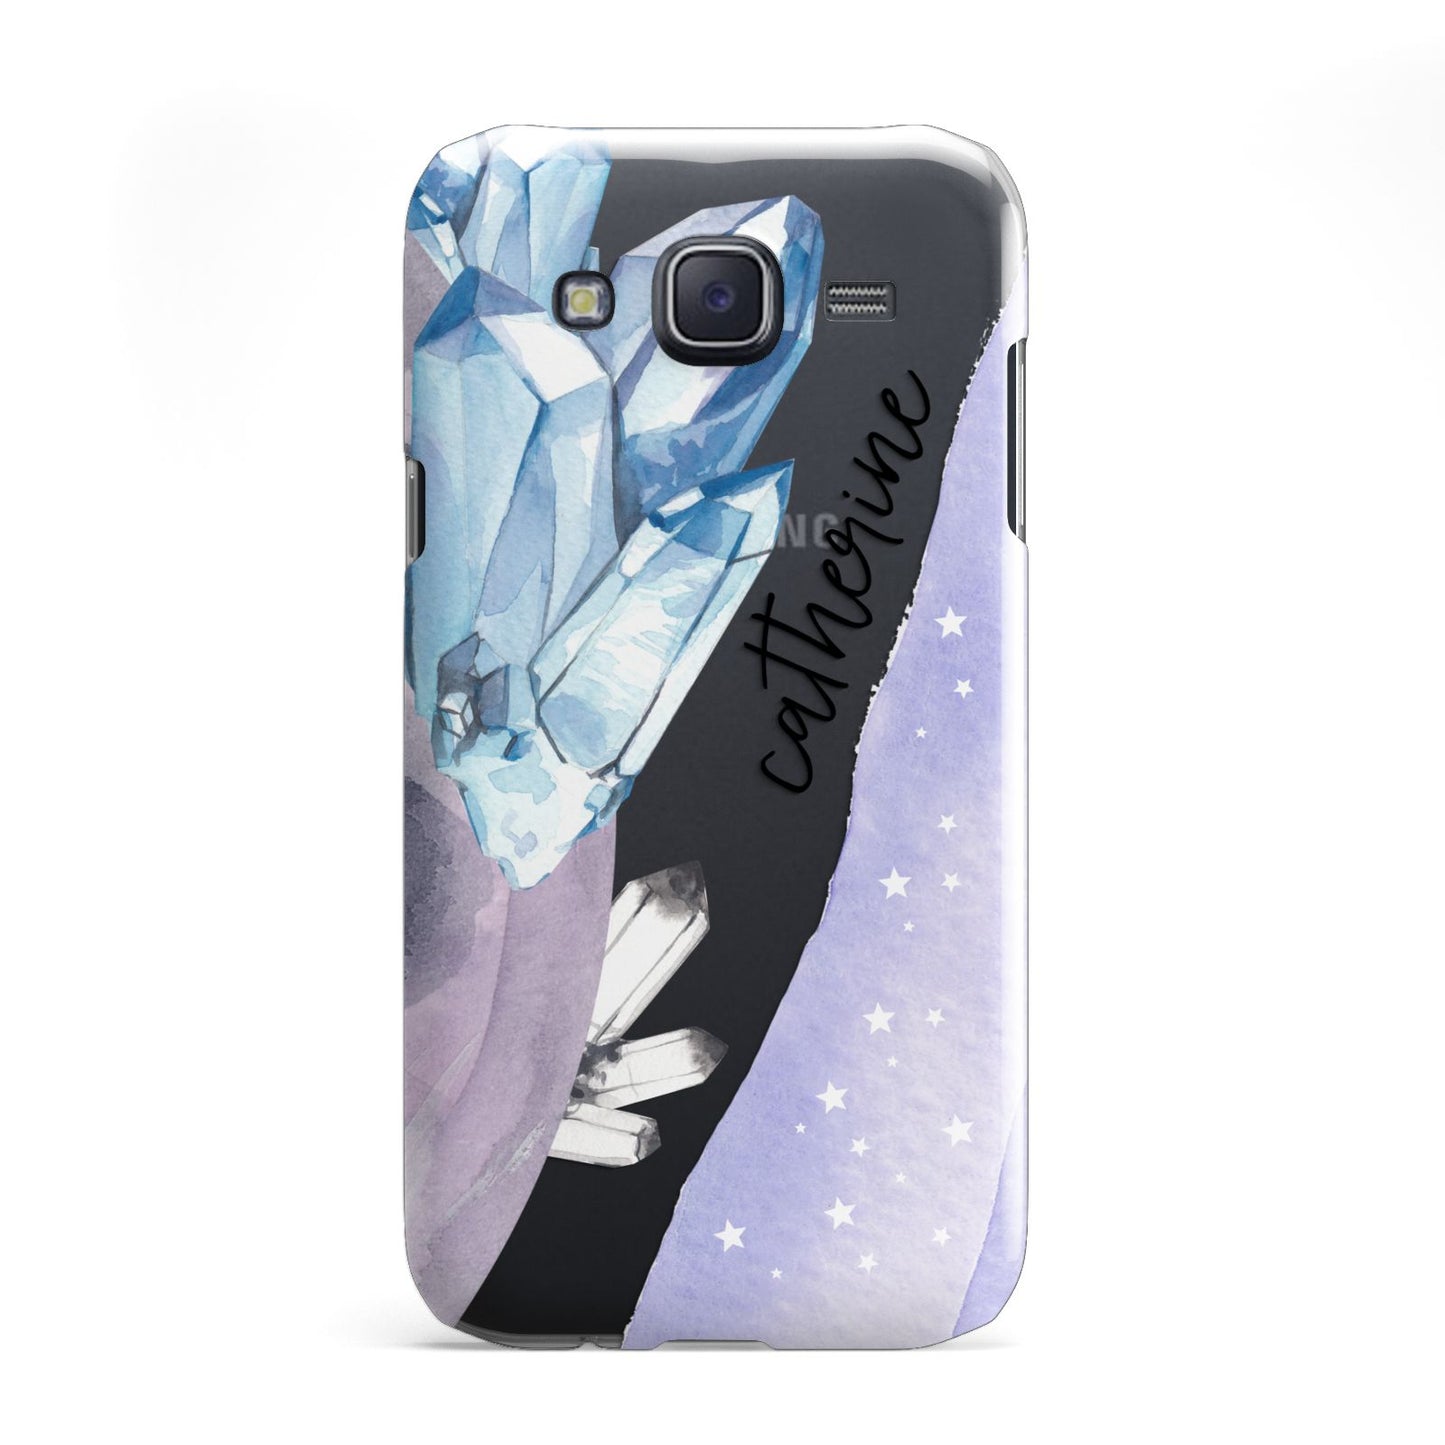 Crystals Personalised Name Samsung Galaxy J5 Case